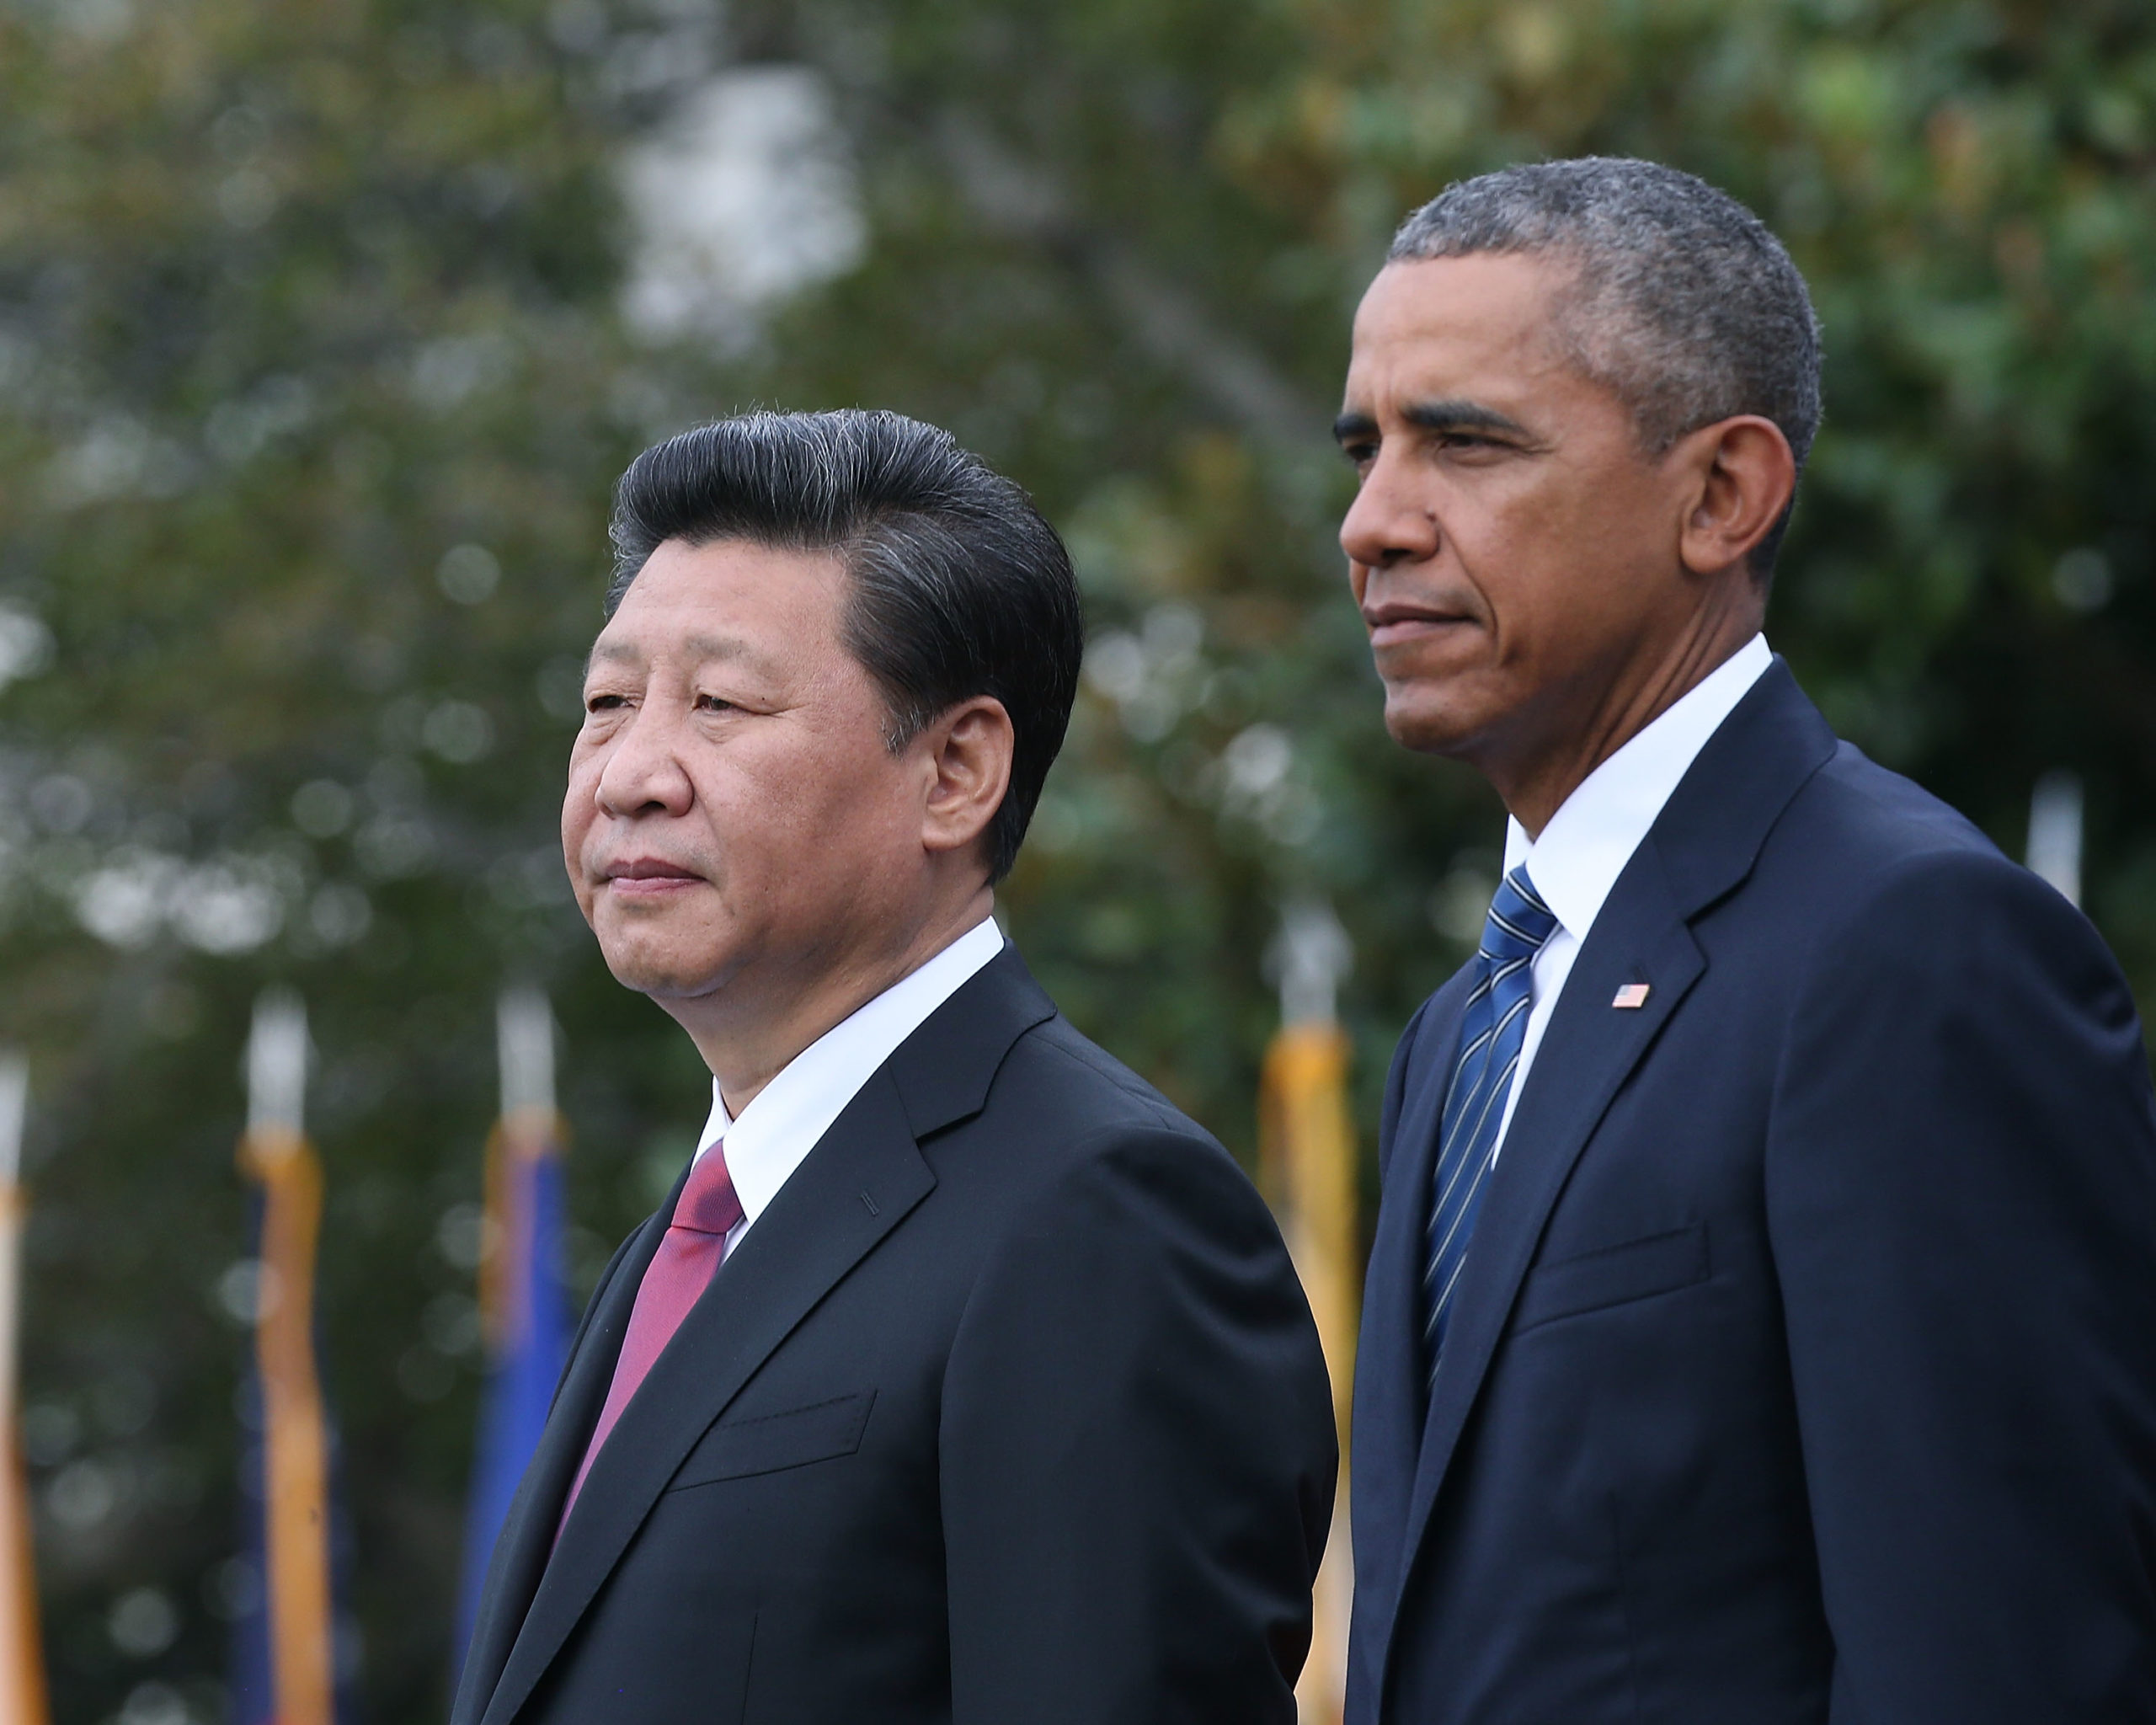 US President Barack Obama (L) and Chinese president Xi Jinping stand together during arrival ceremony at the White House September 25, 2015 in Washington, DC. President Obama officially welcoming President Jinping during a state arrival ceremony followed by a joint news conference news conference later in the day. 